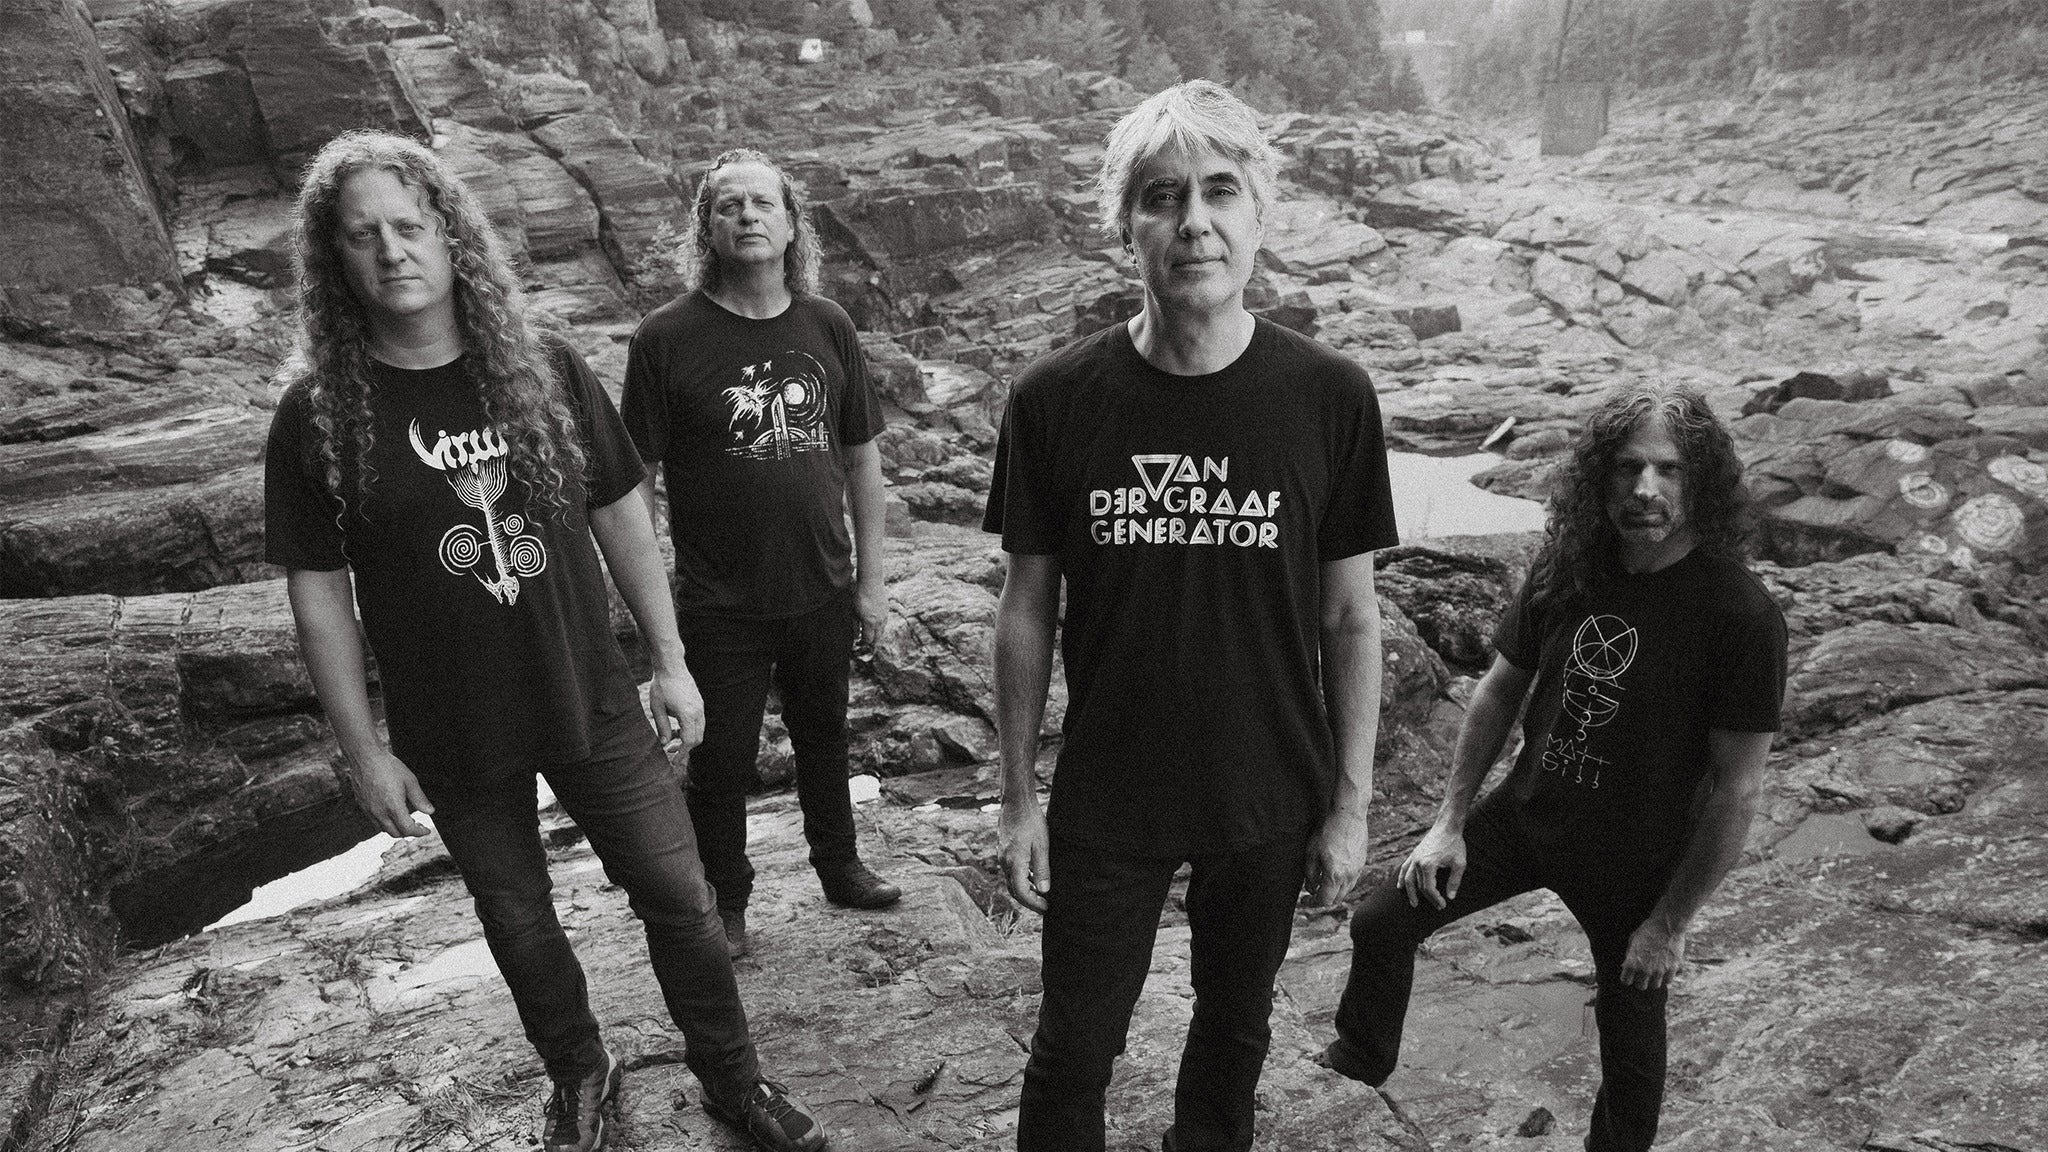 Voivod in Québec promo photo for Achat 2 personnes presale offer code